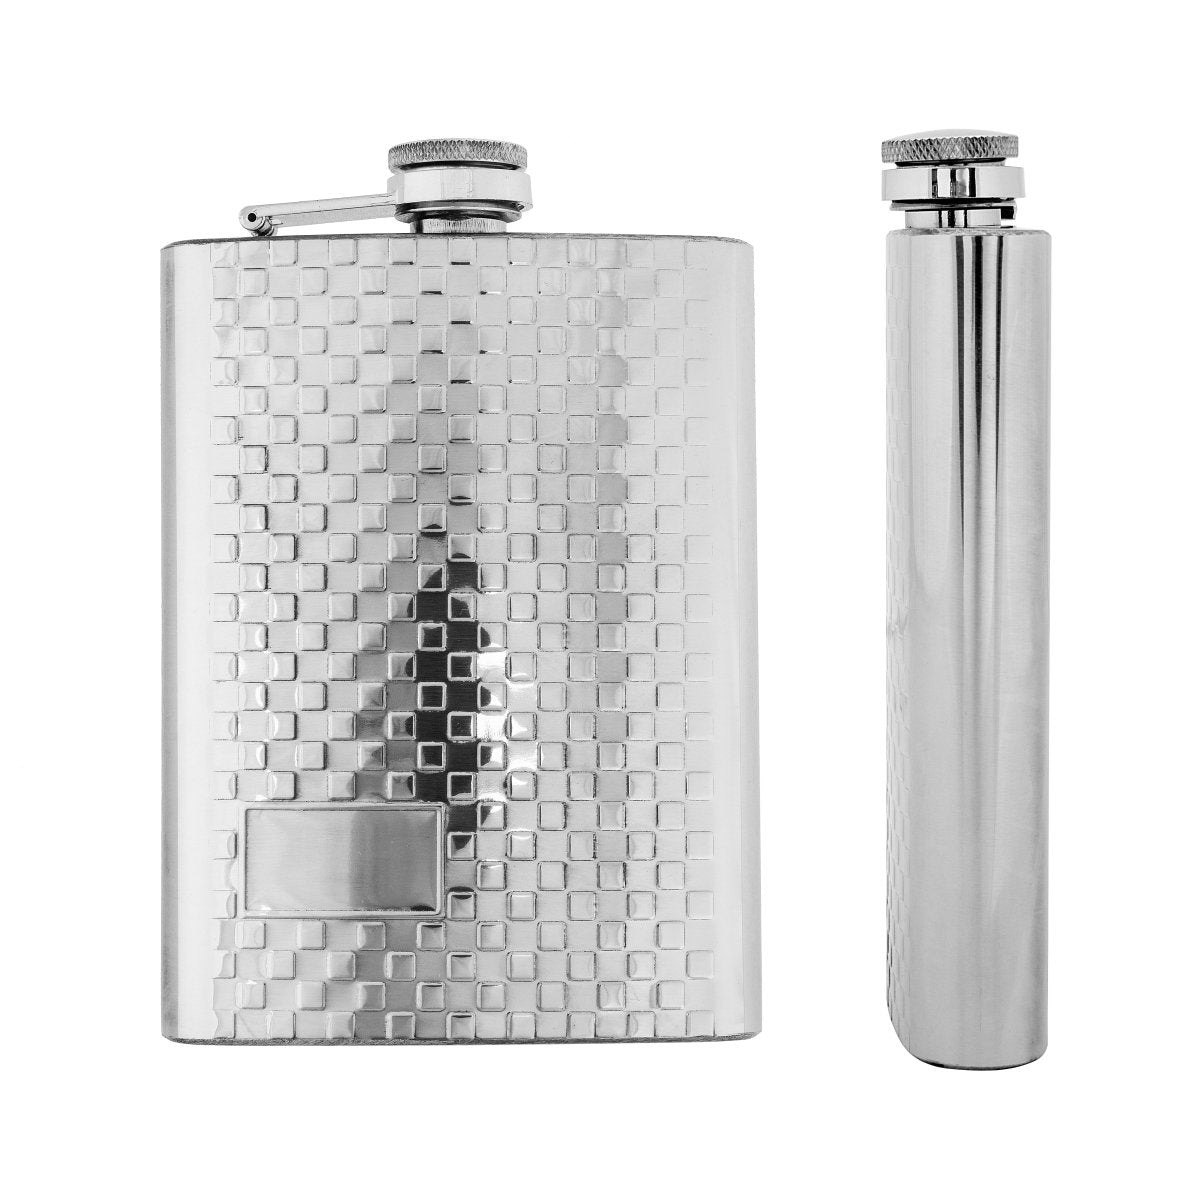 8 oz Silver Stainless Steel Hip Flask for Alcohol Beverages Set of Six